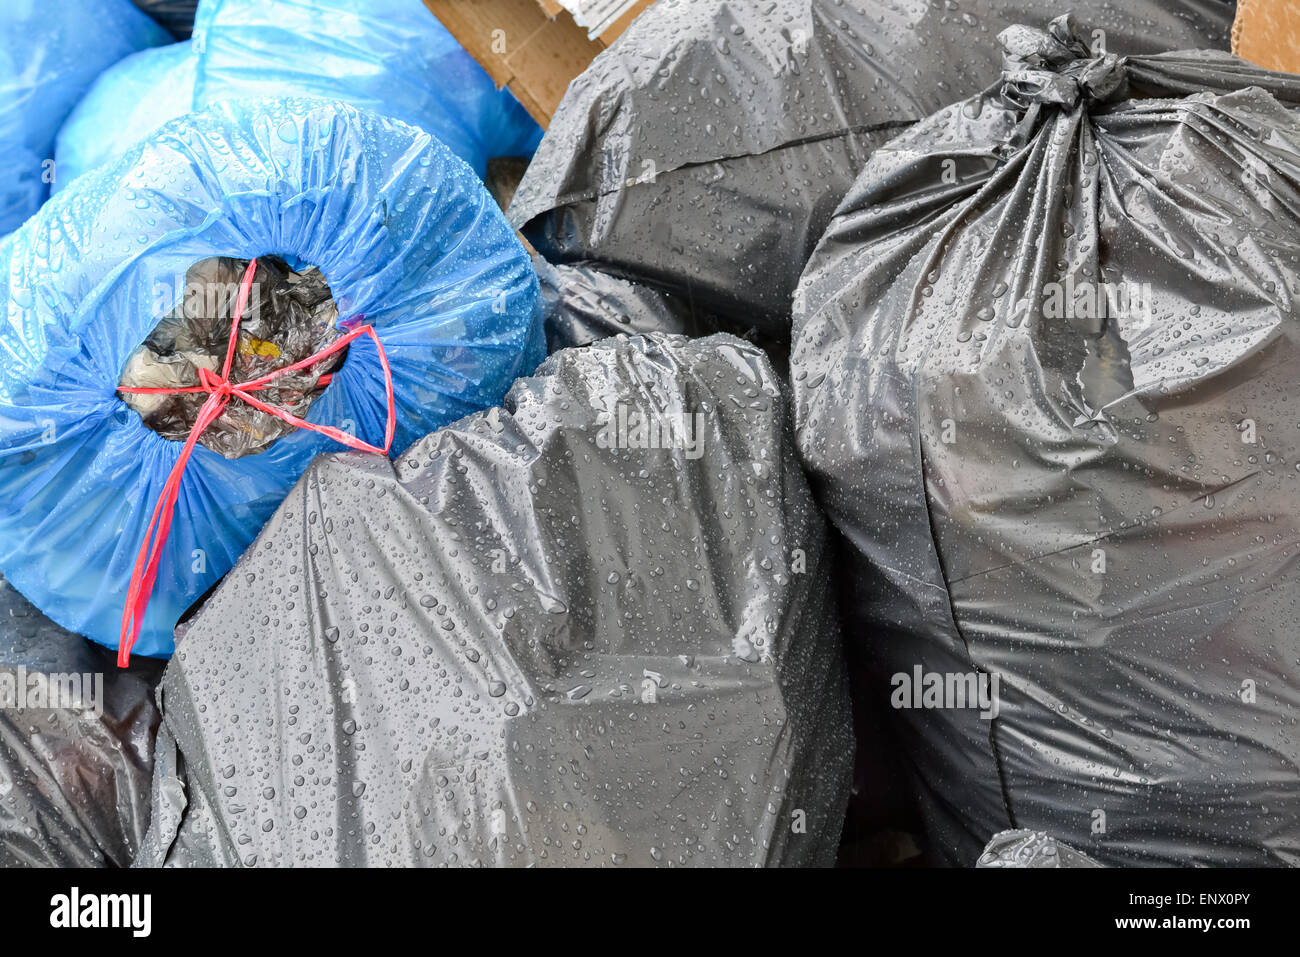 Pile of black and blue plastic trash bags full of garbage Stock Photo